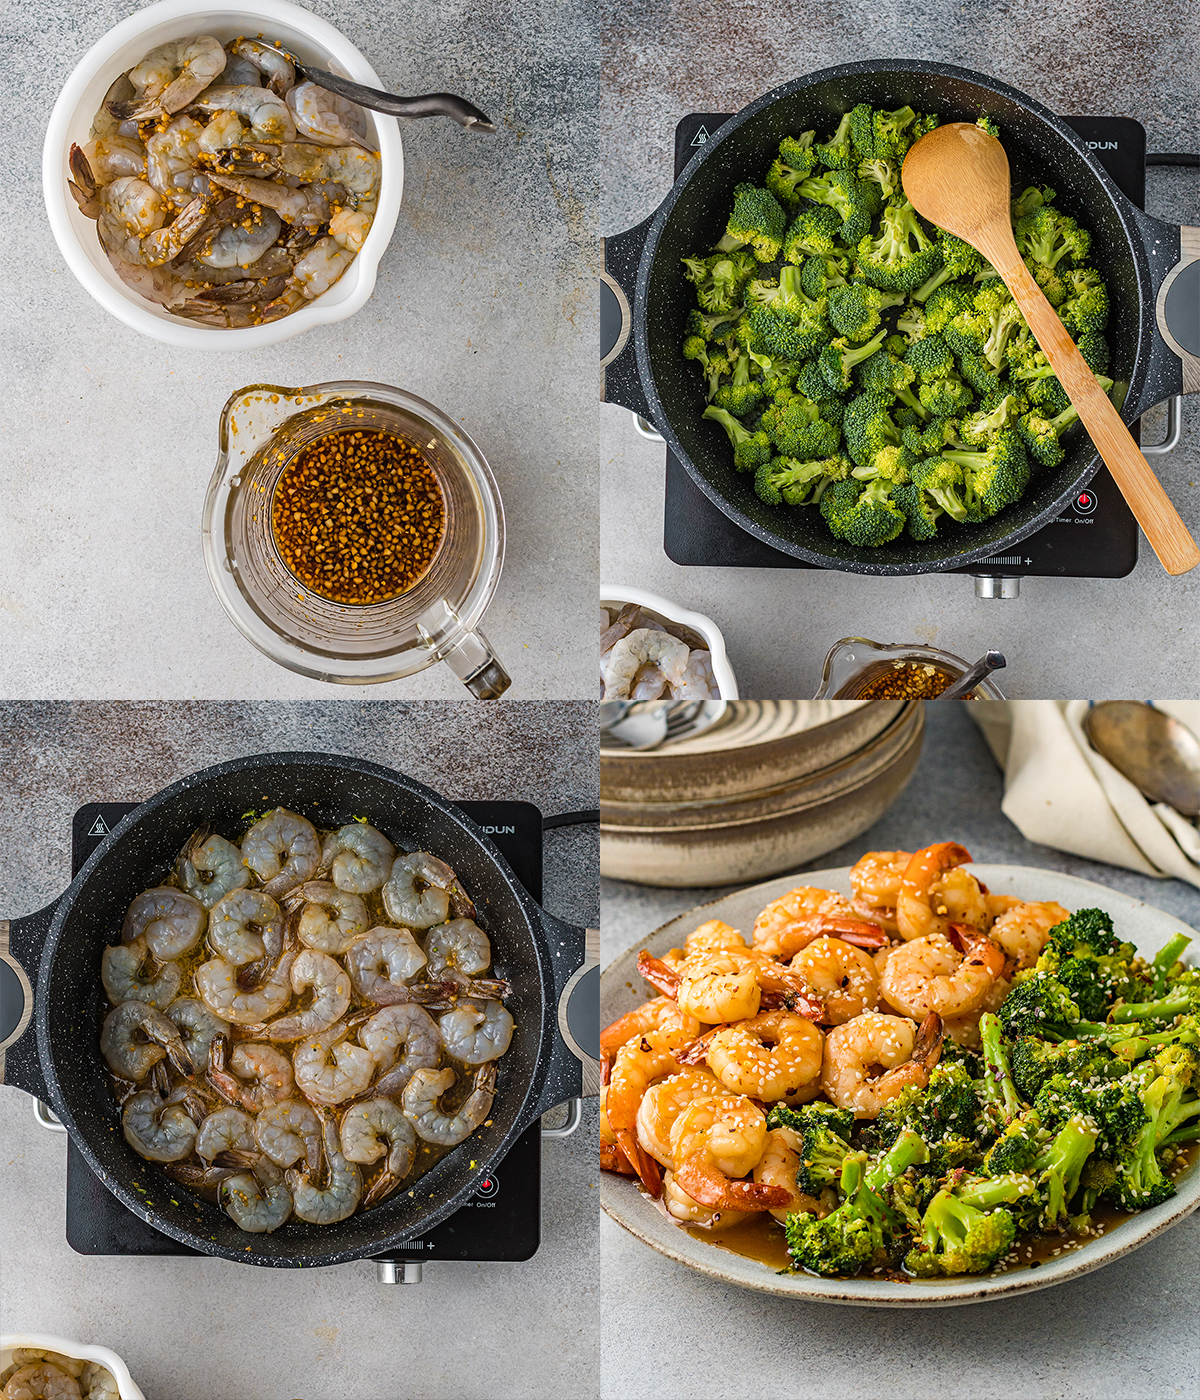 A four photo collage showing the steps to make shrimp and broccoli. 1 - Making sauce and marinading shrimp, 2 - cooking broccoli in pan, 3 - Shrimp cooking in the same pan, 4 - shrimp and broccoli plated